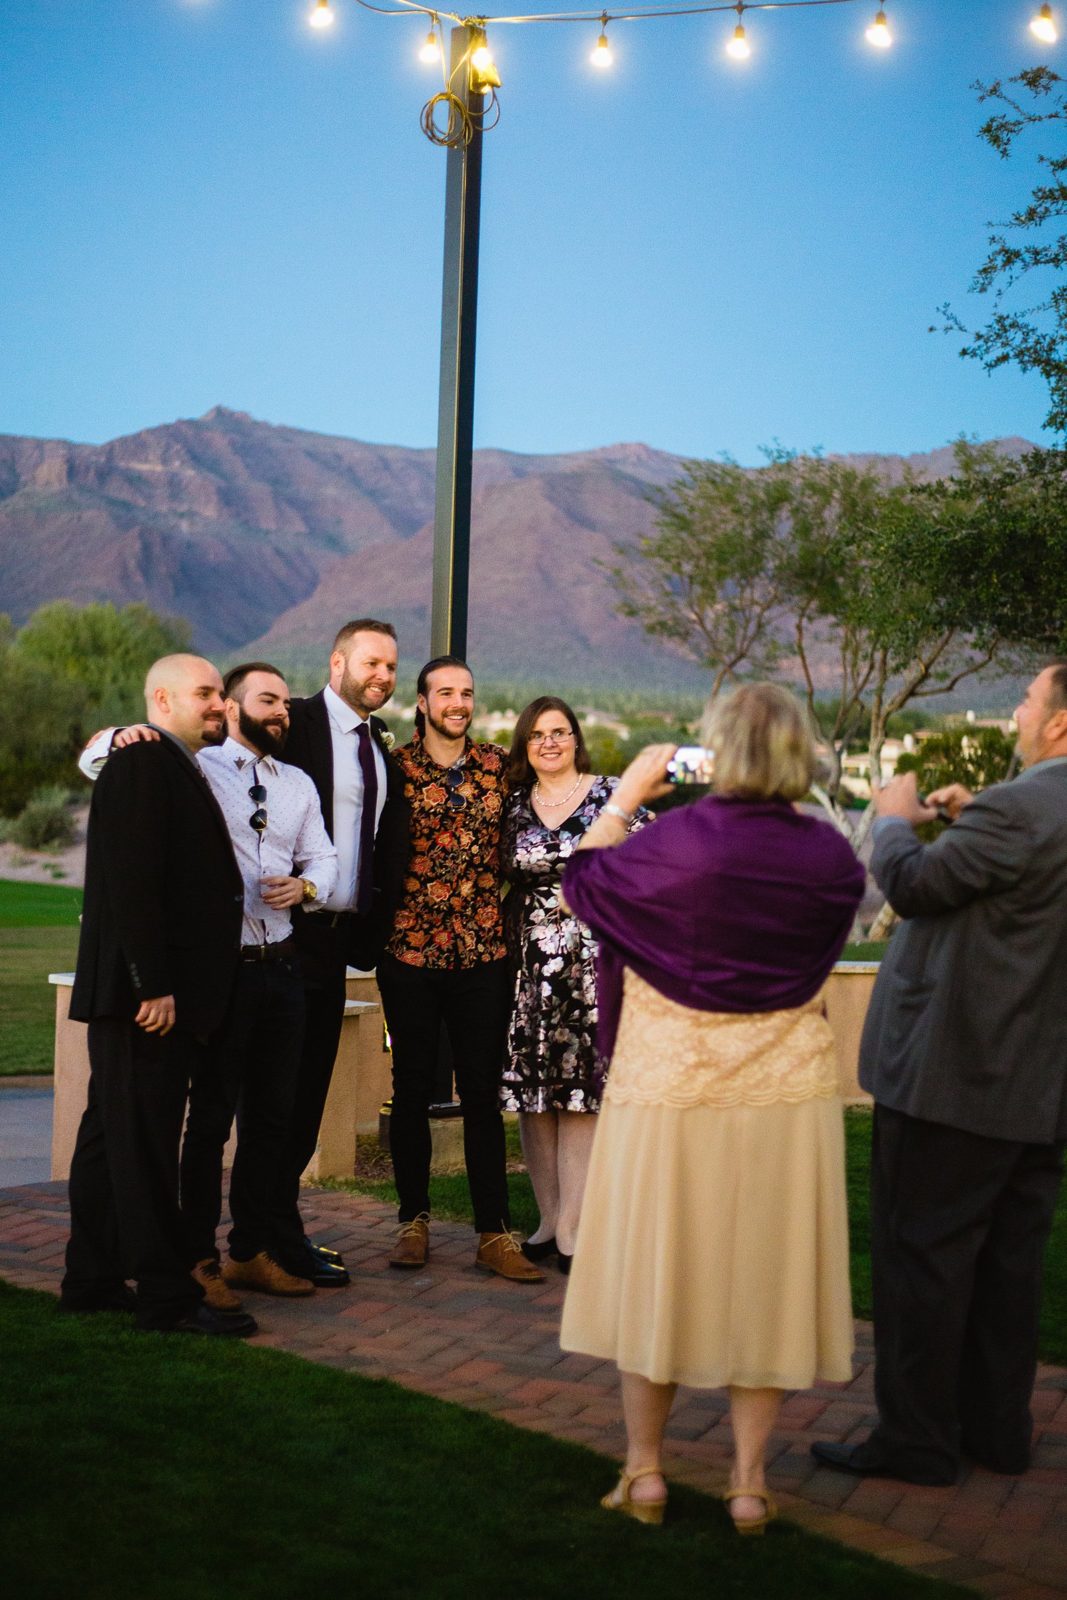 Guests taking a photo with the groom during cocktail hour by PMA Photography.